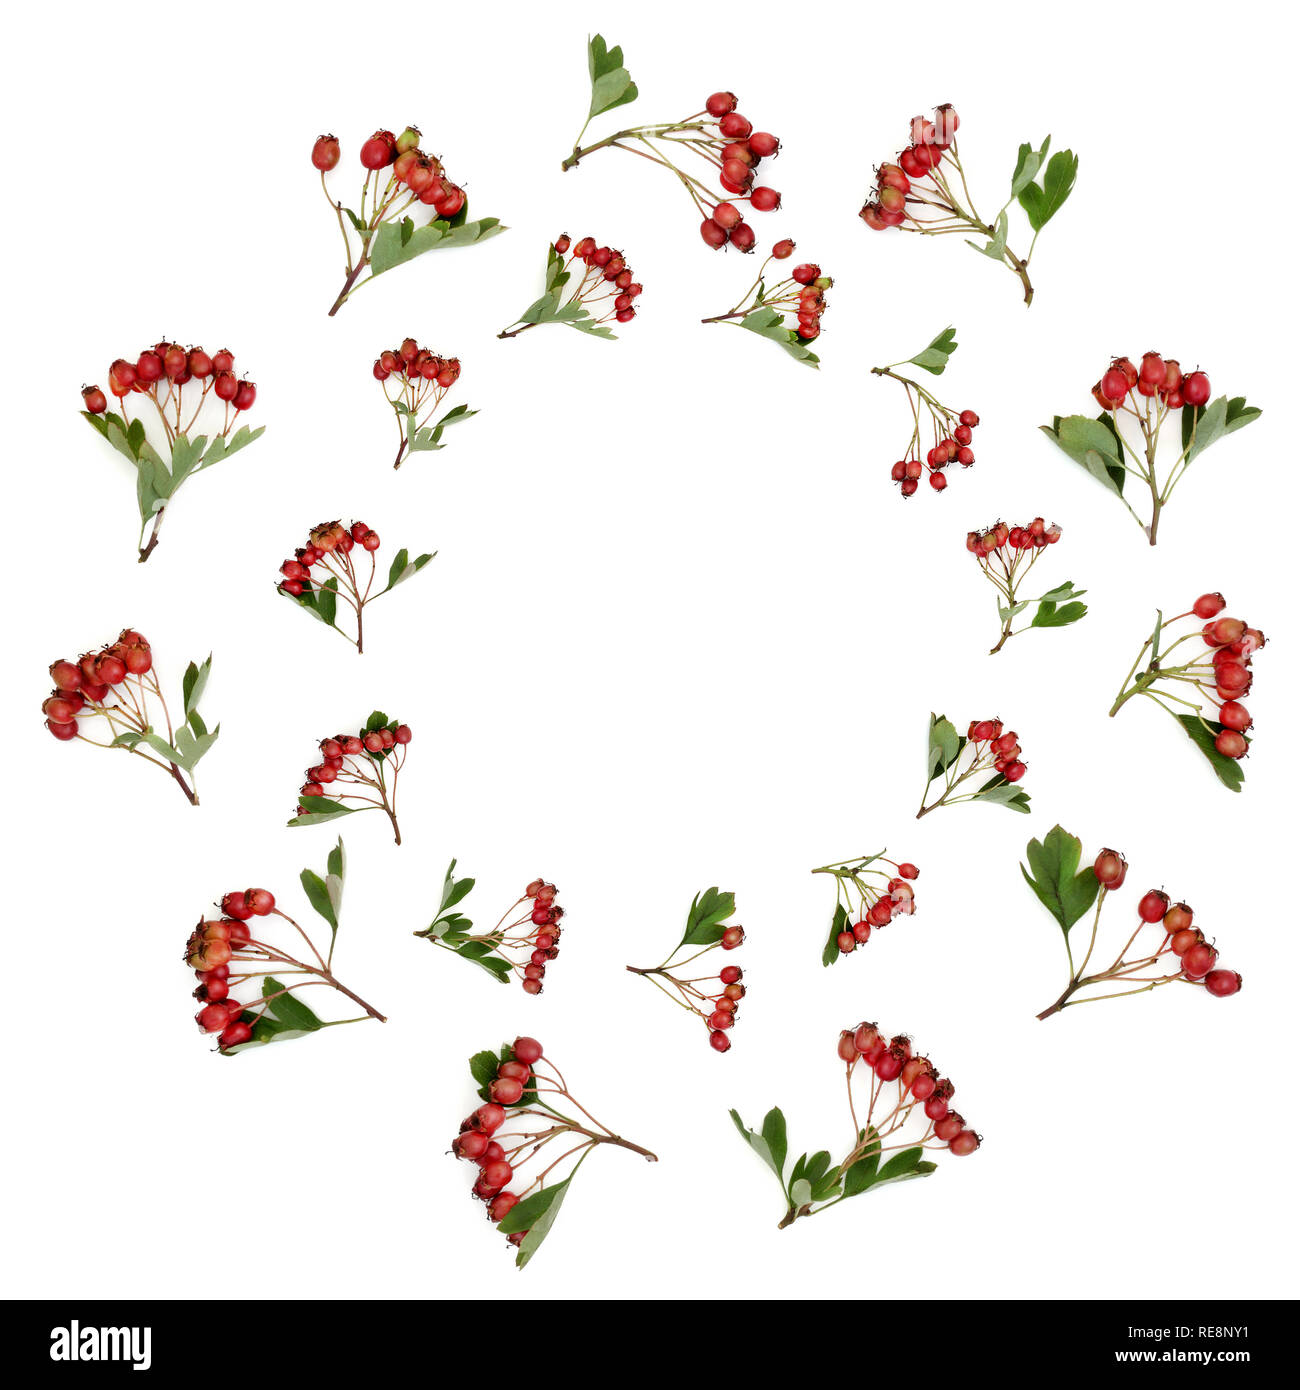 Abstract hawthorn berry wreath on white background. Used in herbal medicine to lower blood pressure & improve circulation. Stock Photo